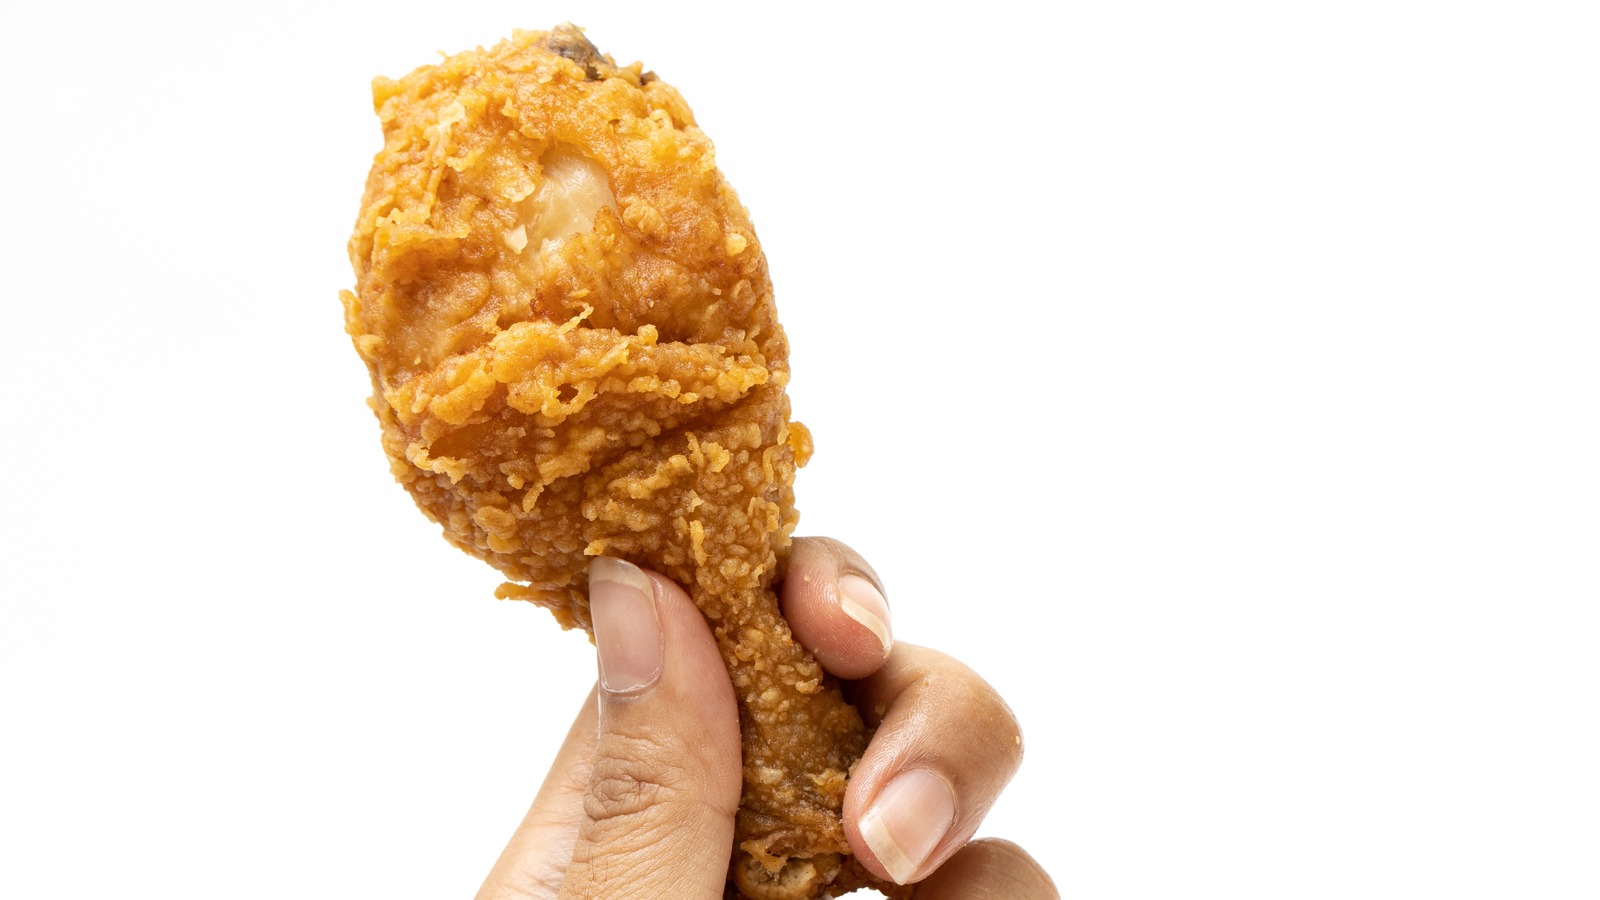 23% Say This Restaurant Has The Worst Fried Chicken